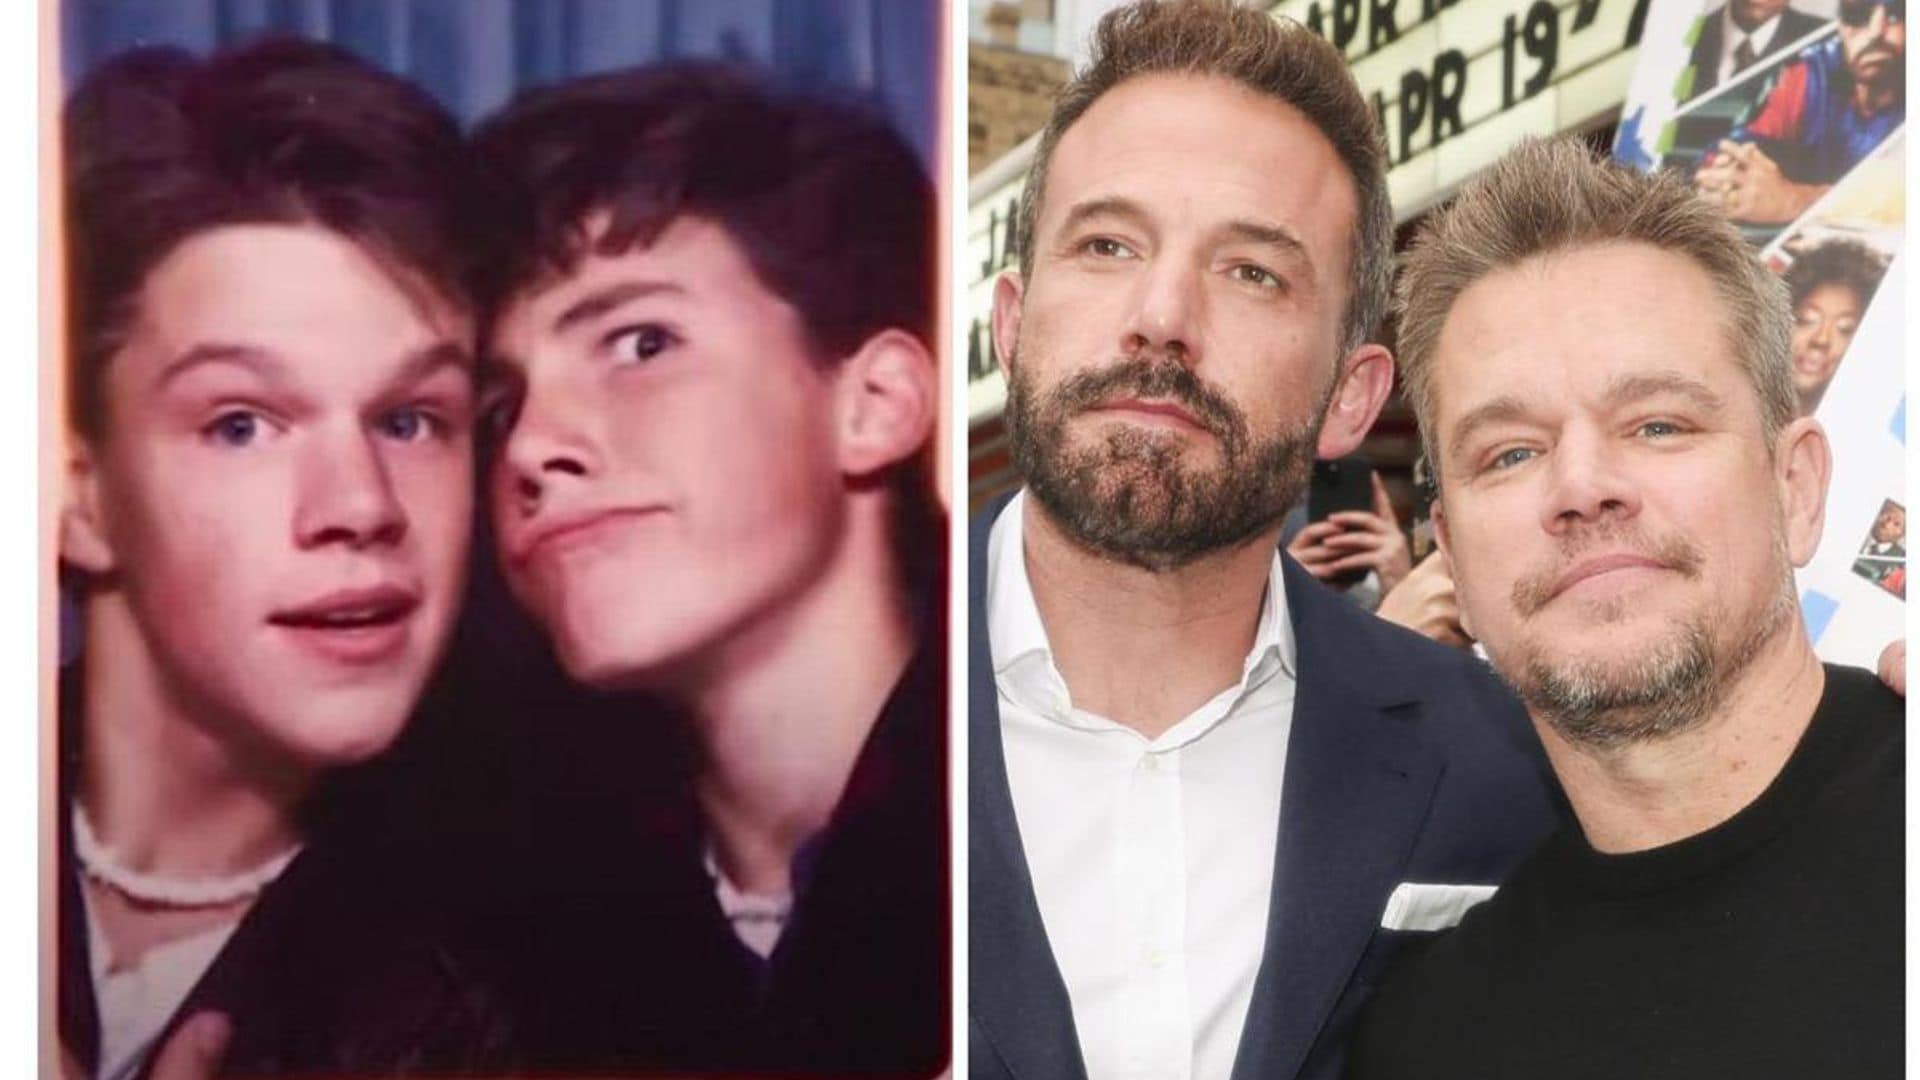 A photo from the 80s of Ben Affleck and Matt Damon proves how their friendship stood the test of time